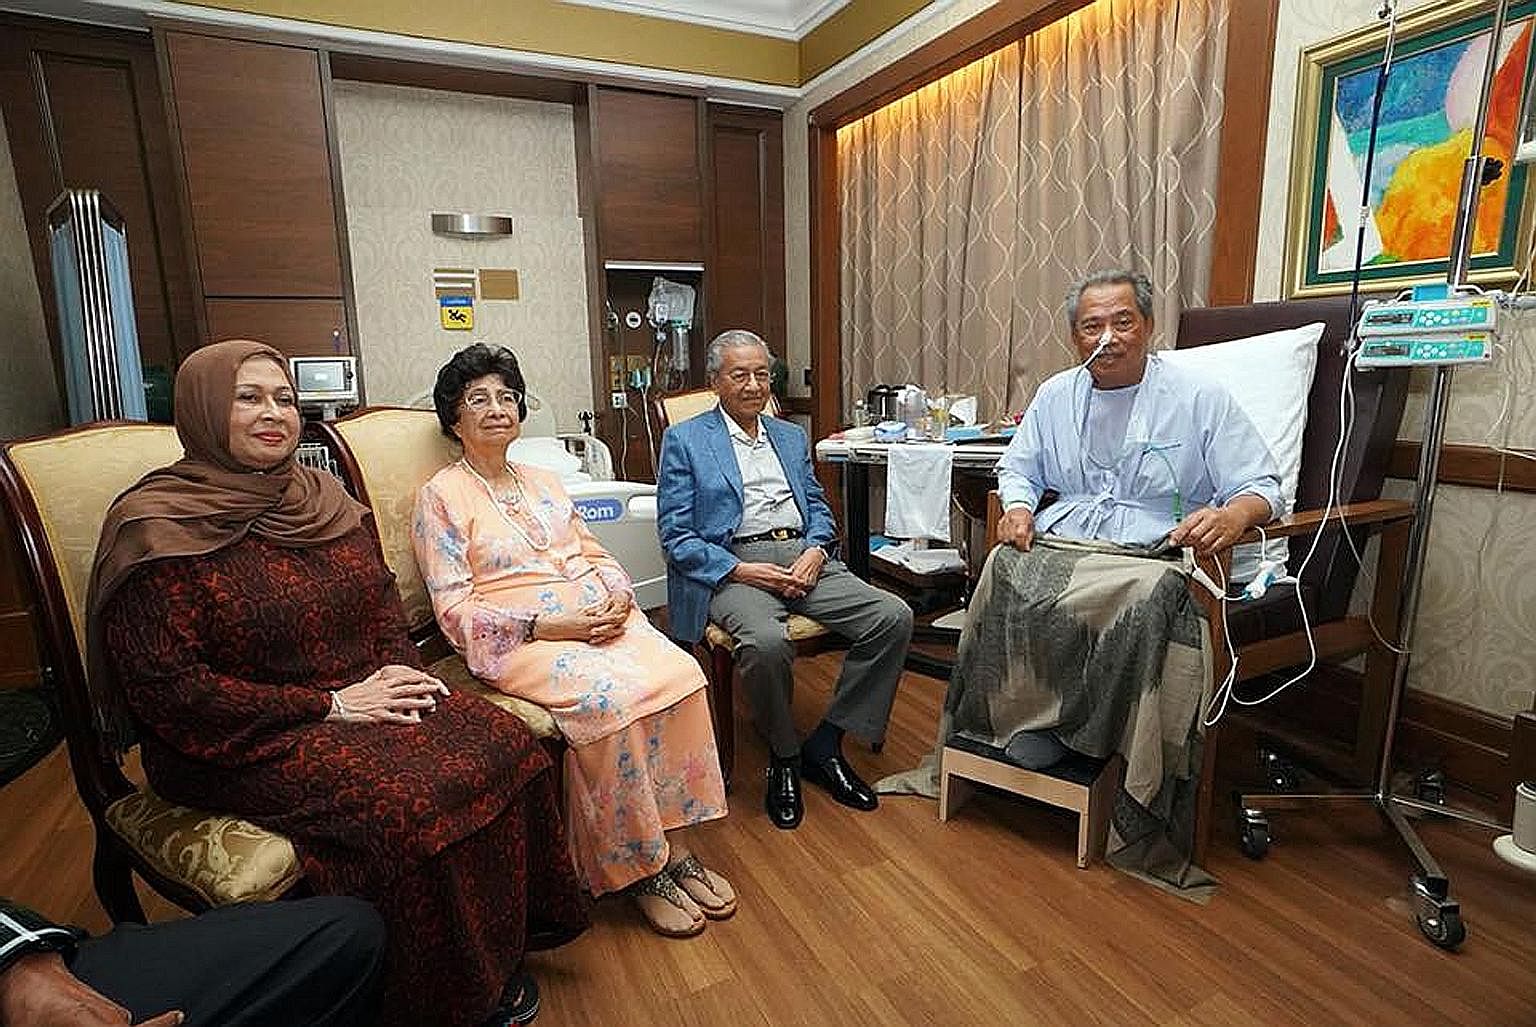 Malaysian Home Affairs Minister Muhyiddin Yassin, who is warded in a Singapore hospital, received a visit from Malaysian Prime Minister Mahathir Mohamad and his wife, Tun Siti Hasmah Mohamad Ali. With them is Tan Sri Muhyiddin's wife, Puan Sri Noorai